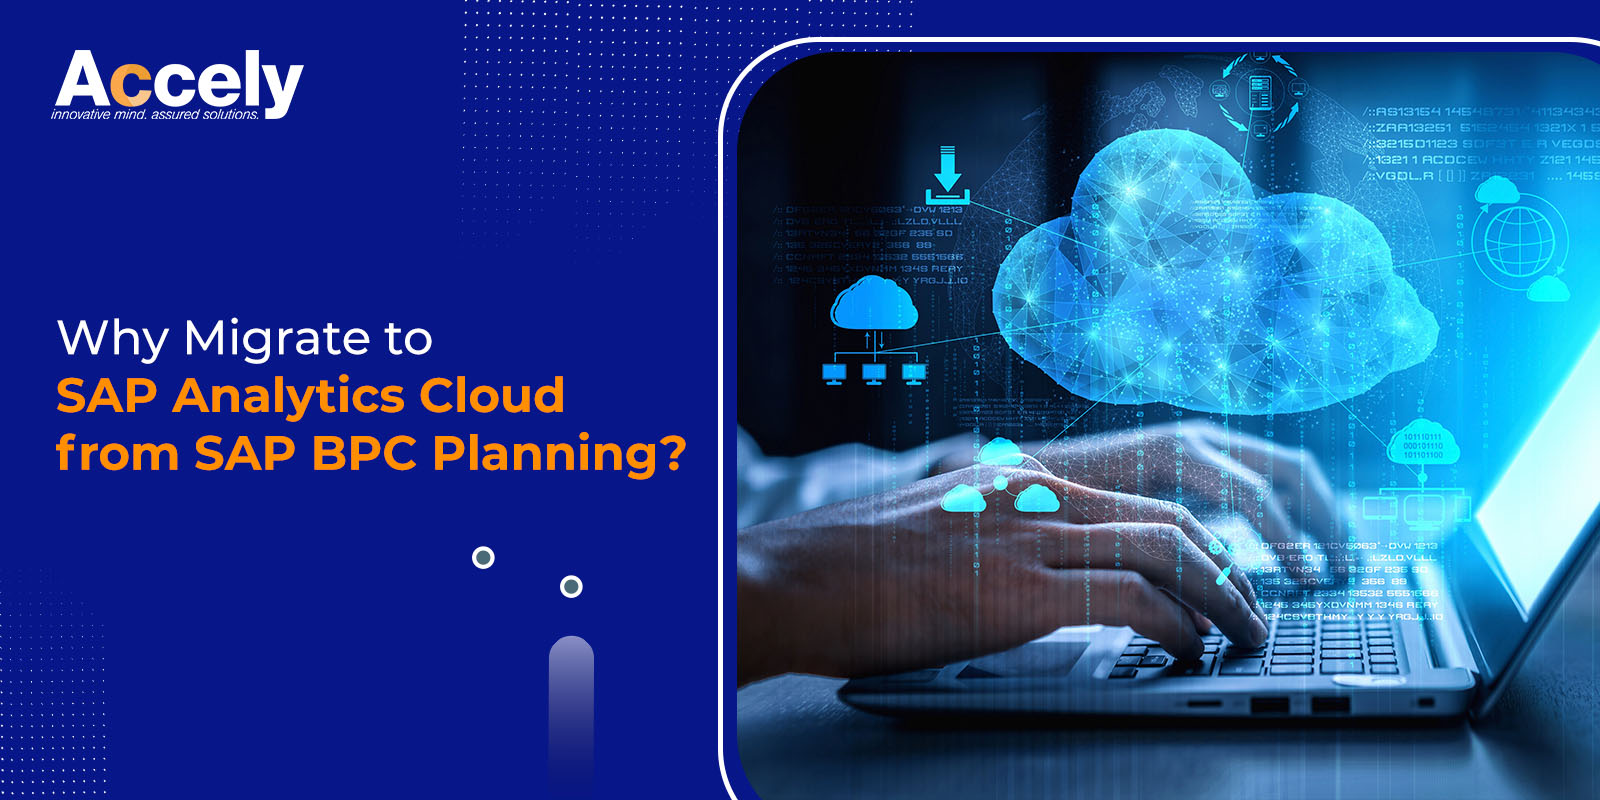 Why Migrate to SAP Analytics Cloud from SAP BPC Planning?